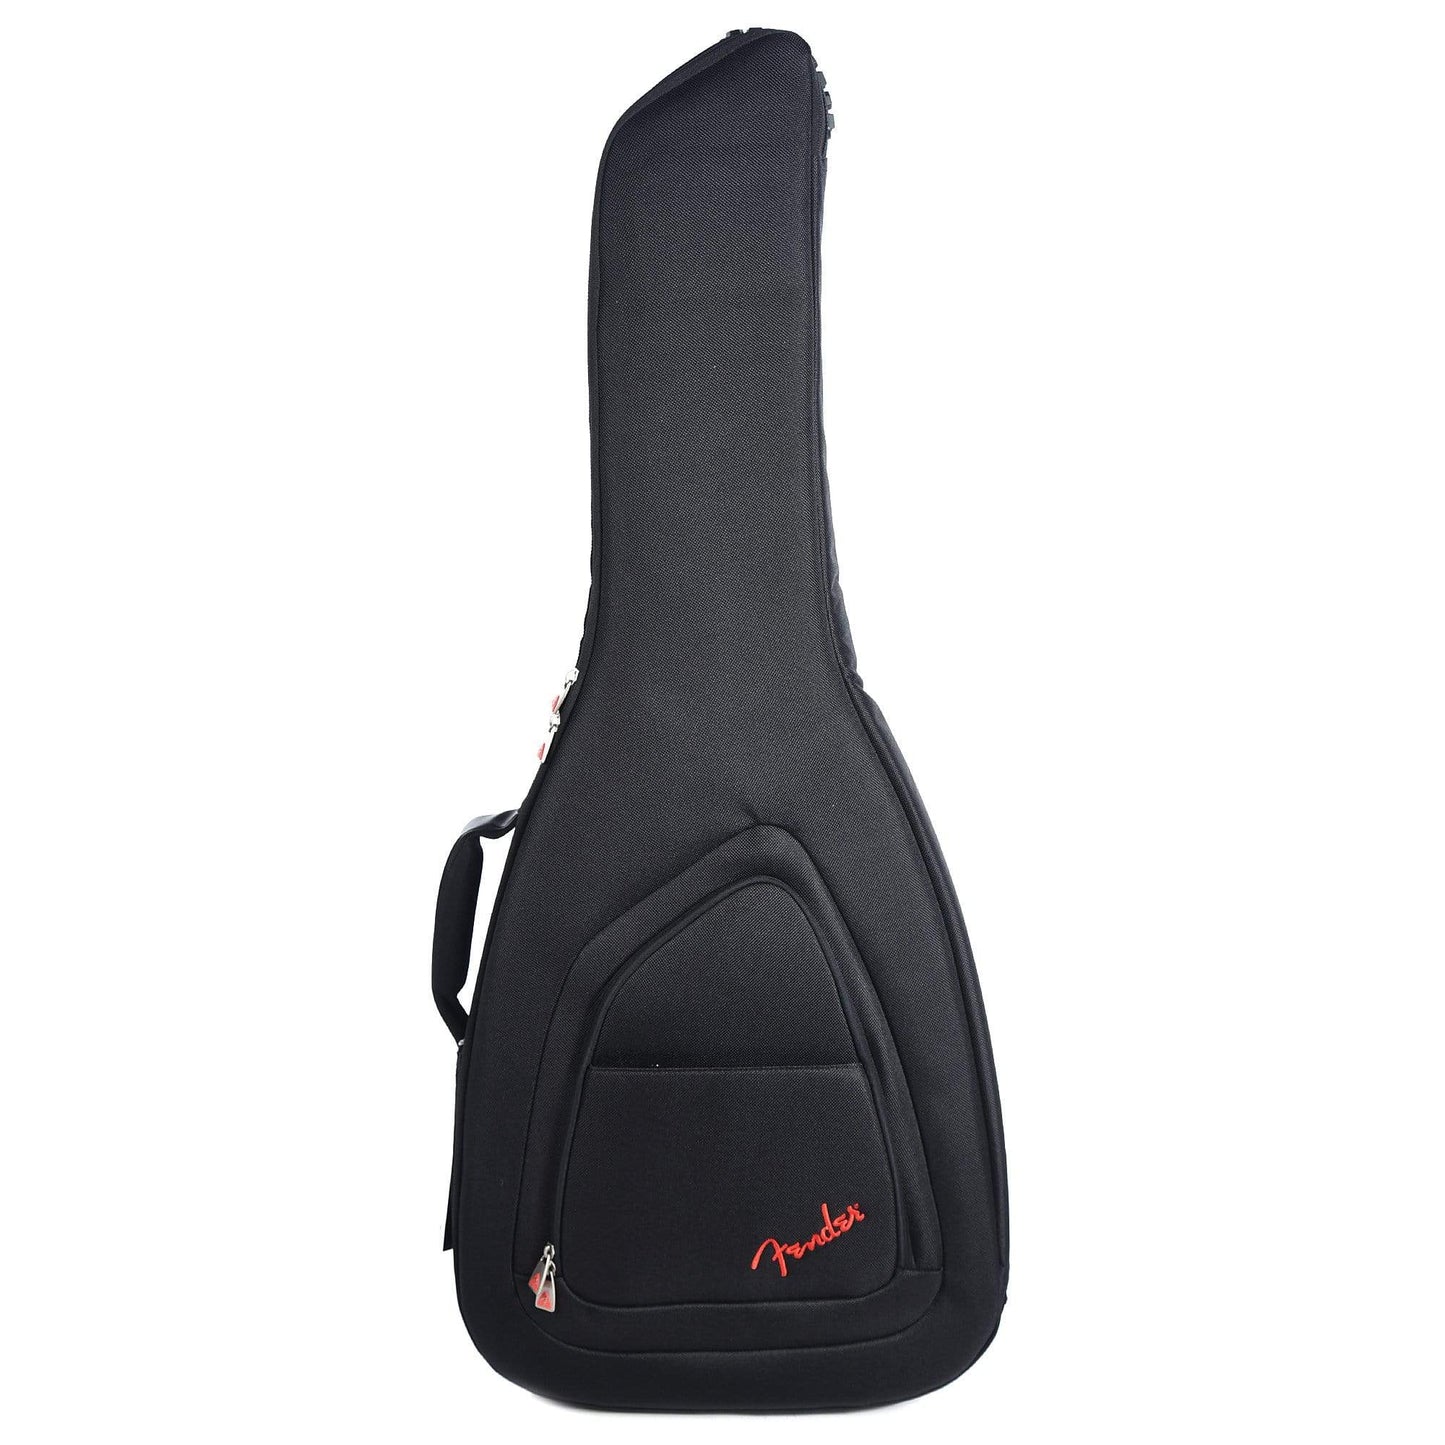 Fender FE1225 Gig Bag for Electric Guitar Accessories / Cases and Gig Bags / Guitar Gig Bags